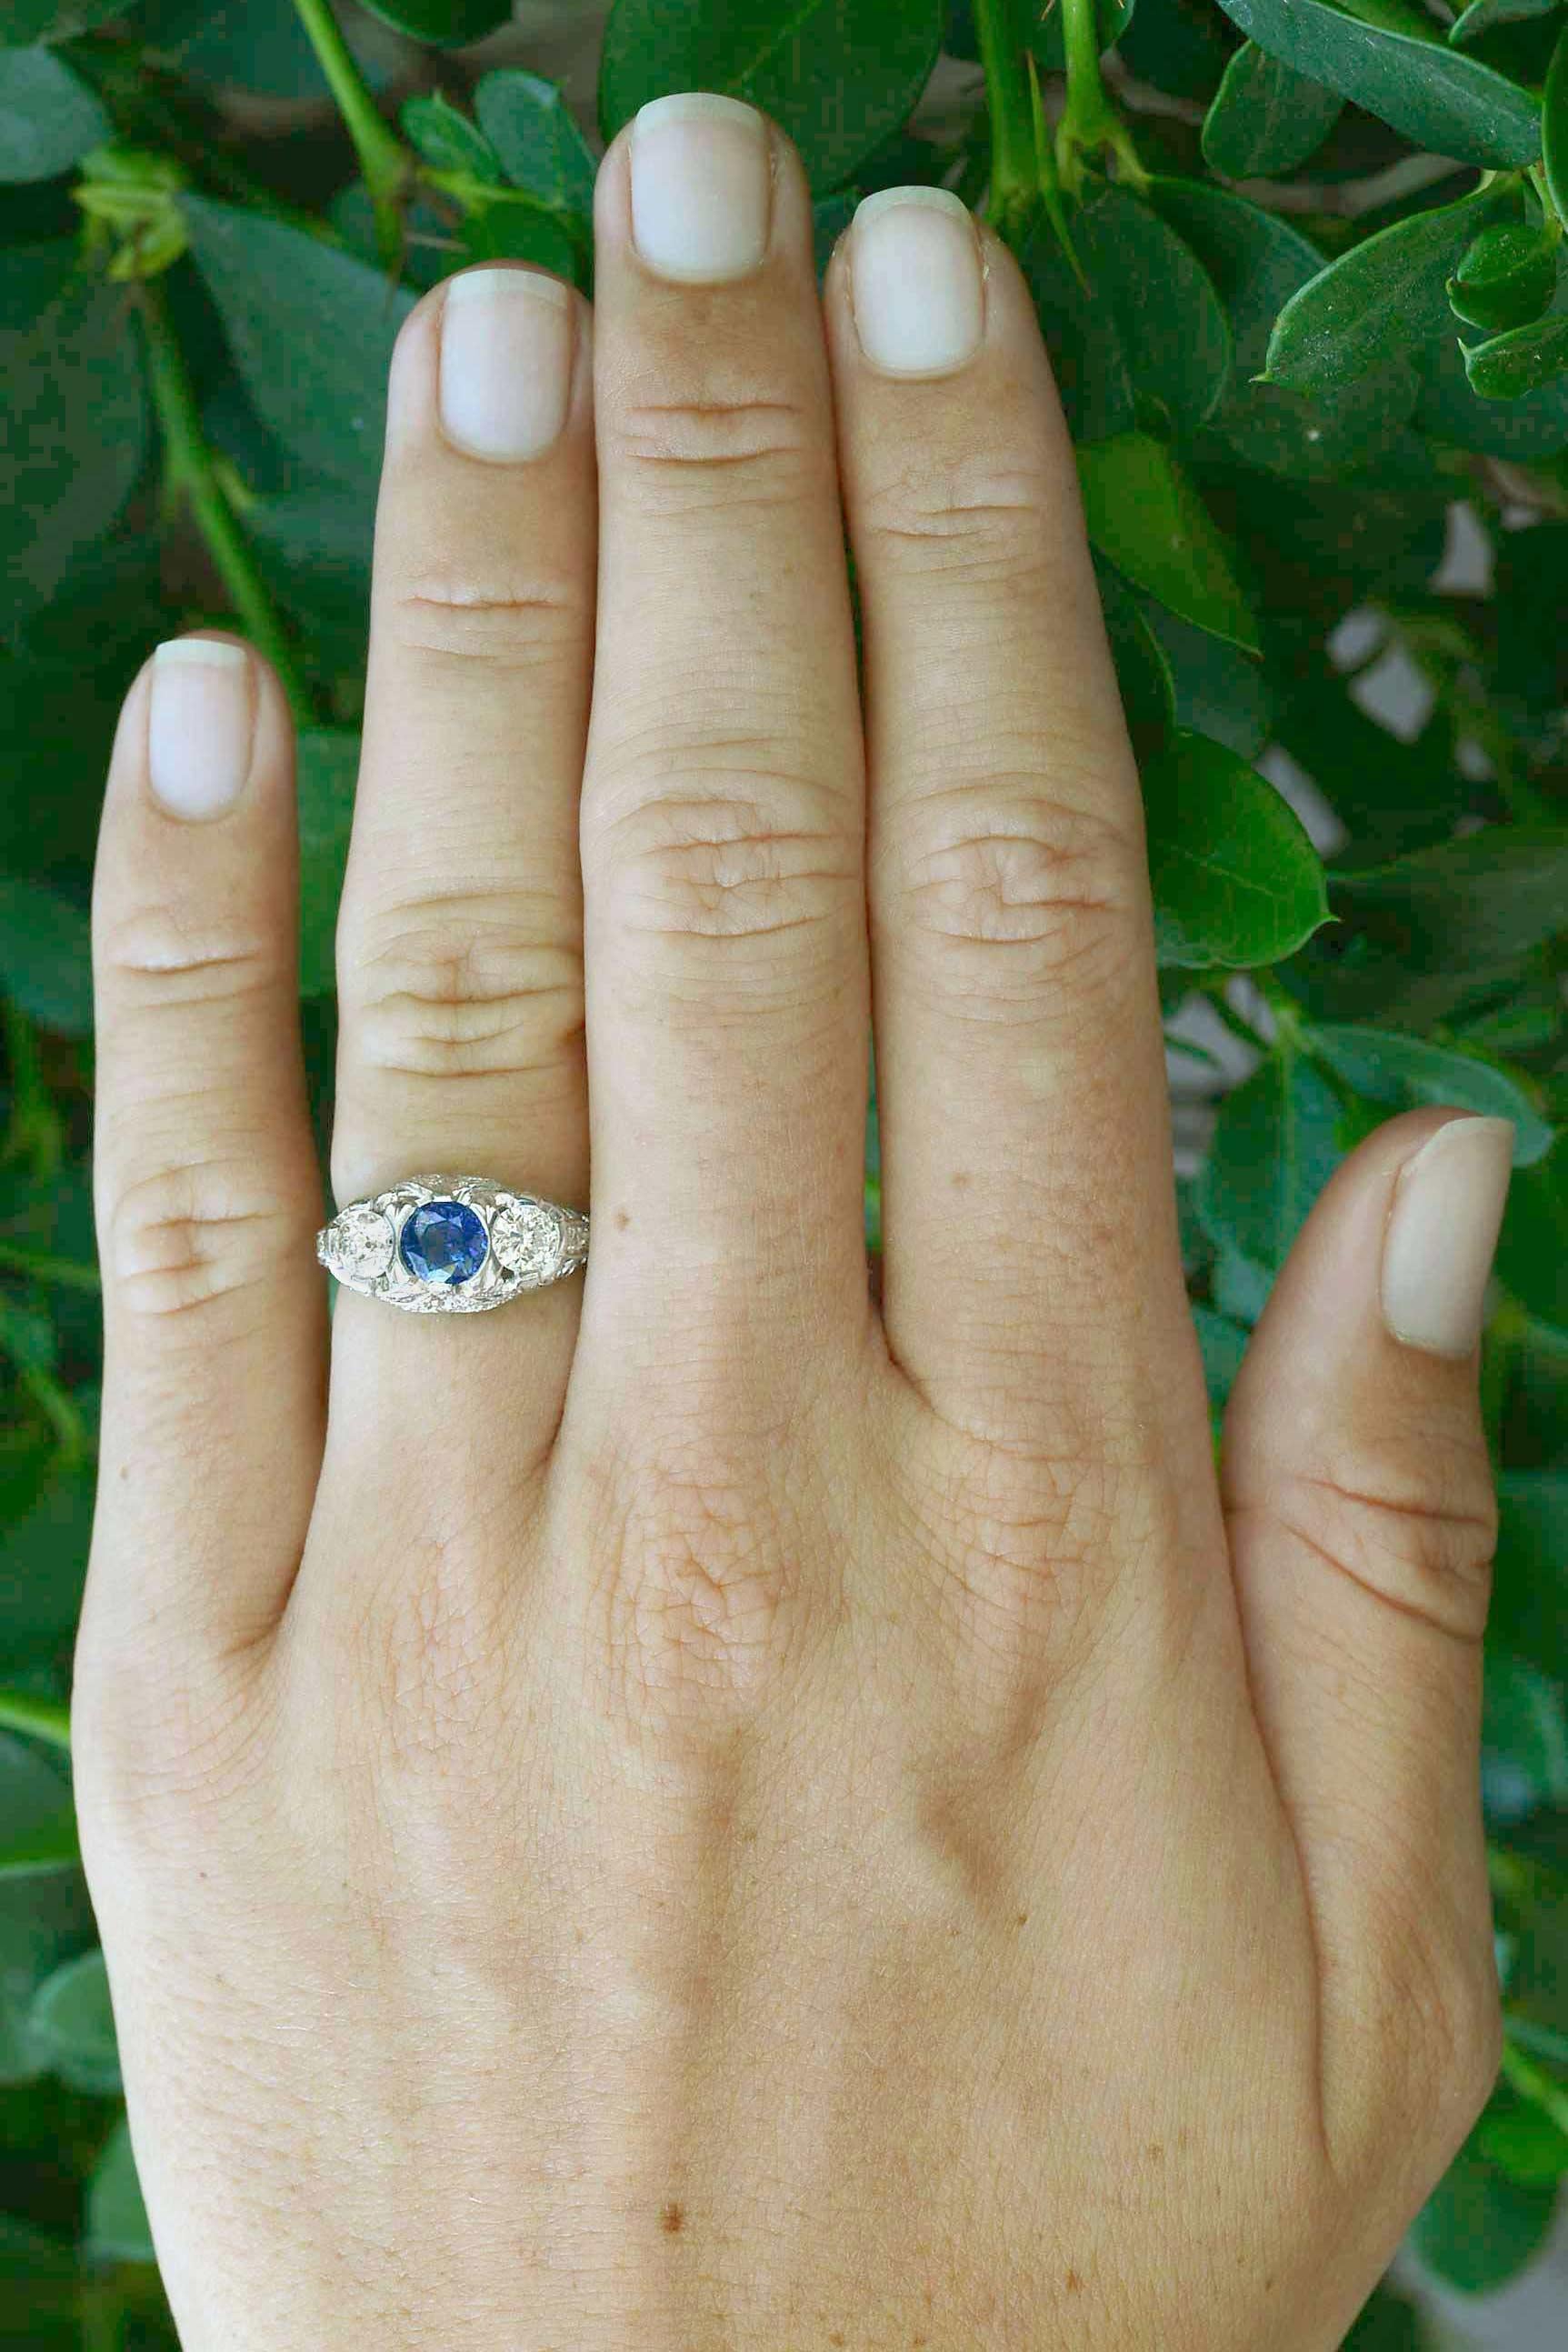 The 2 chunky old diamonds in this vintage Art Deco heirloom sparkle with a unique personality. We love how these antique, dazzling hand cut diamonds sit harmoniously on either side of a velvety, vibrant blue sapphire gemstone.
Why you'll love it: